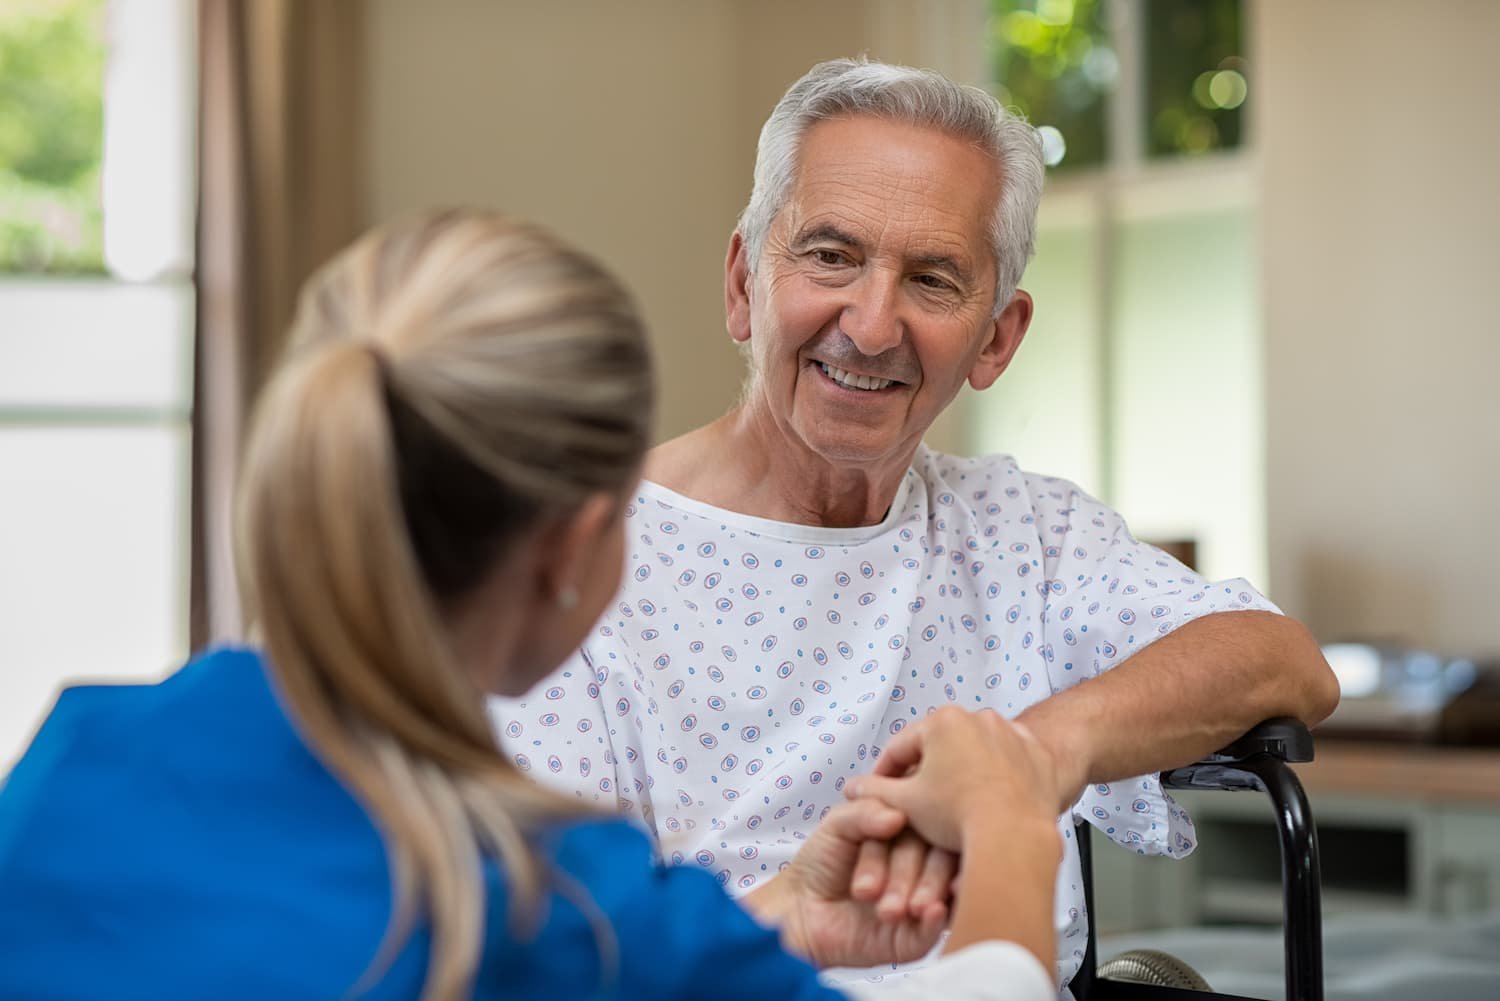 medical professional interacting with a smiling, elderly patient